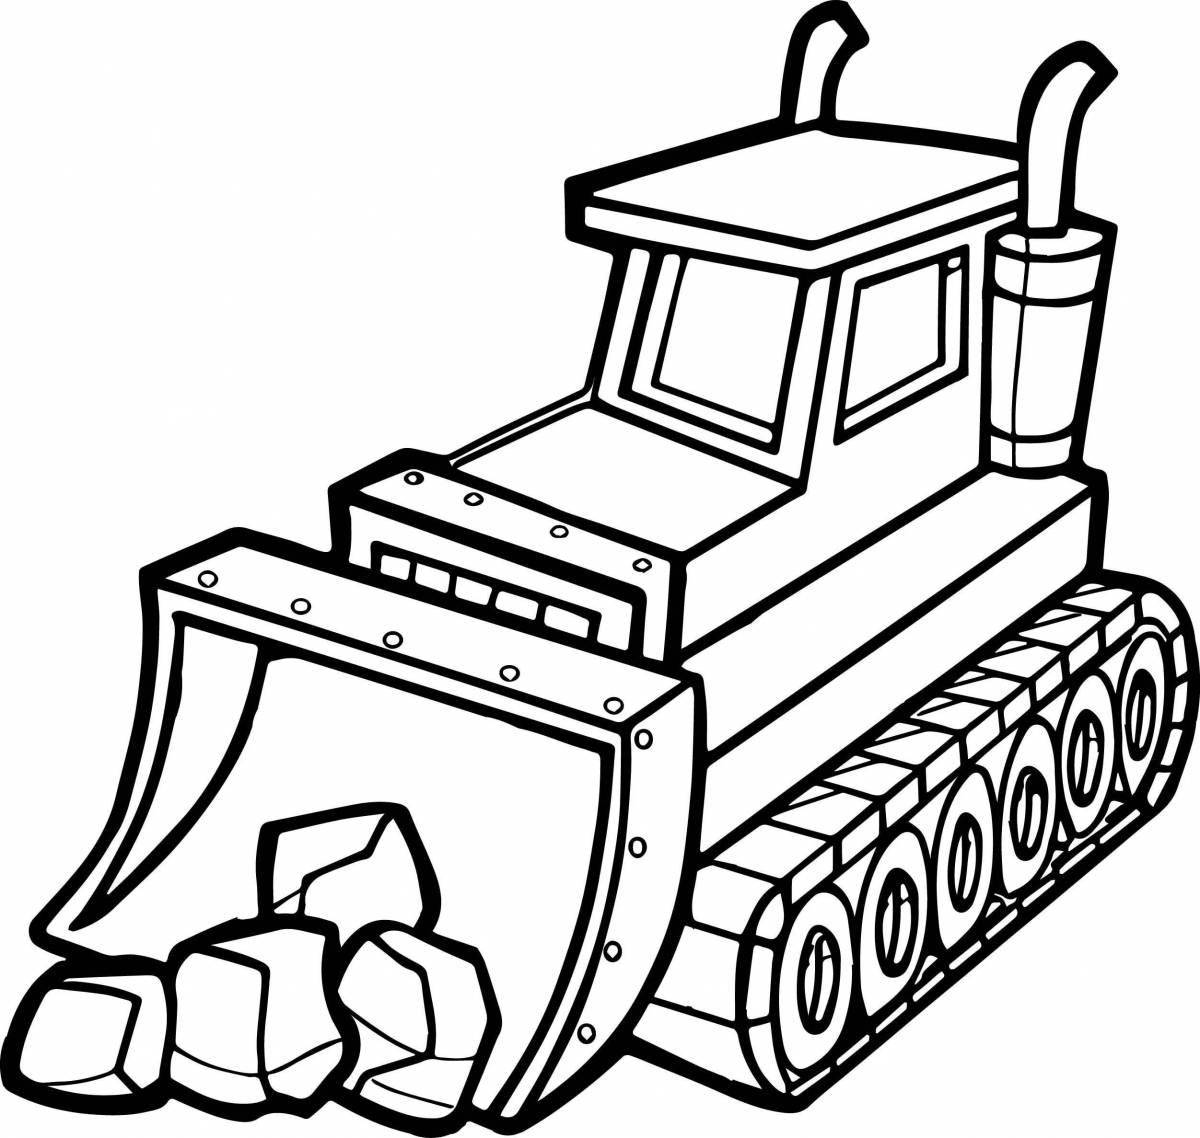 Incredible construction vehicle coloring book for babies